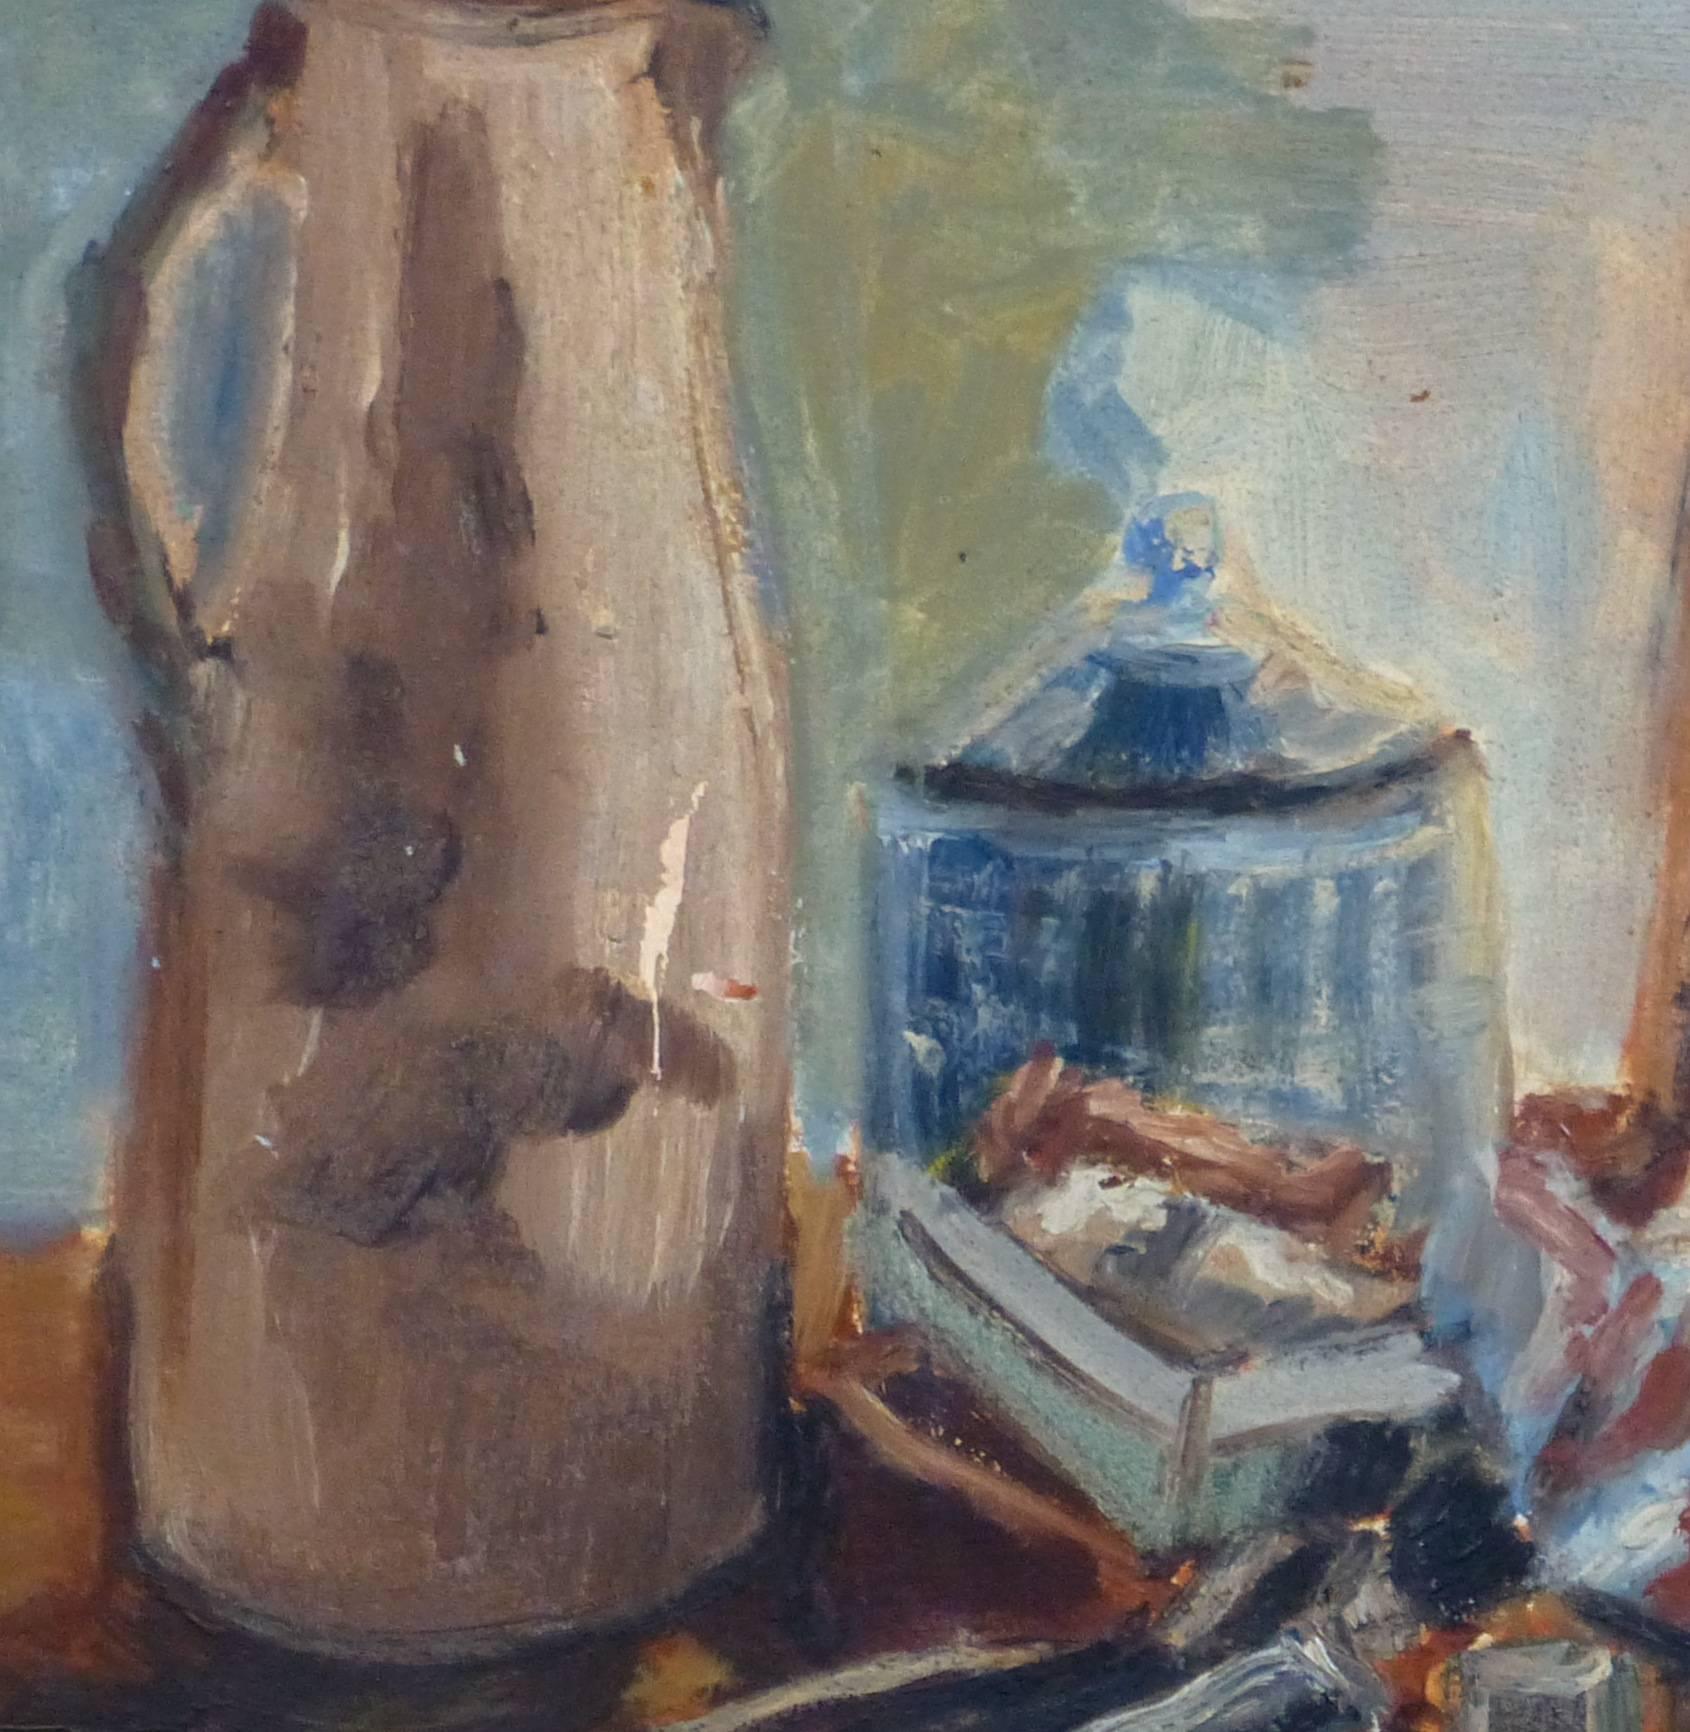 Vintage French Oil Still Life - The Painter's Box - Painting by Unknown